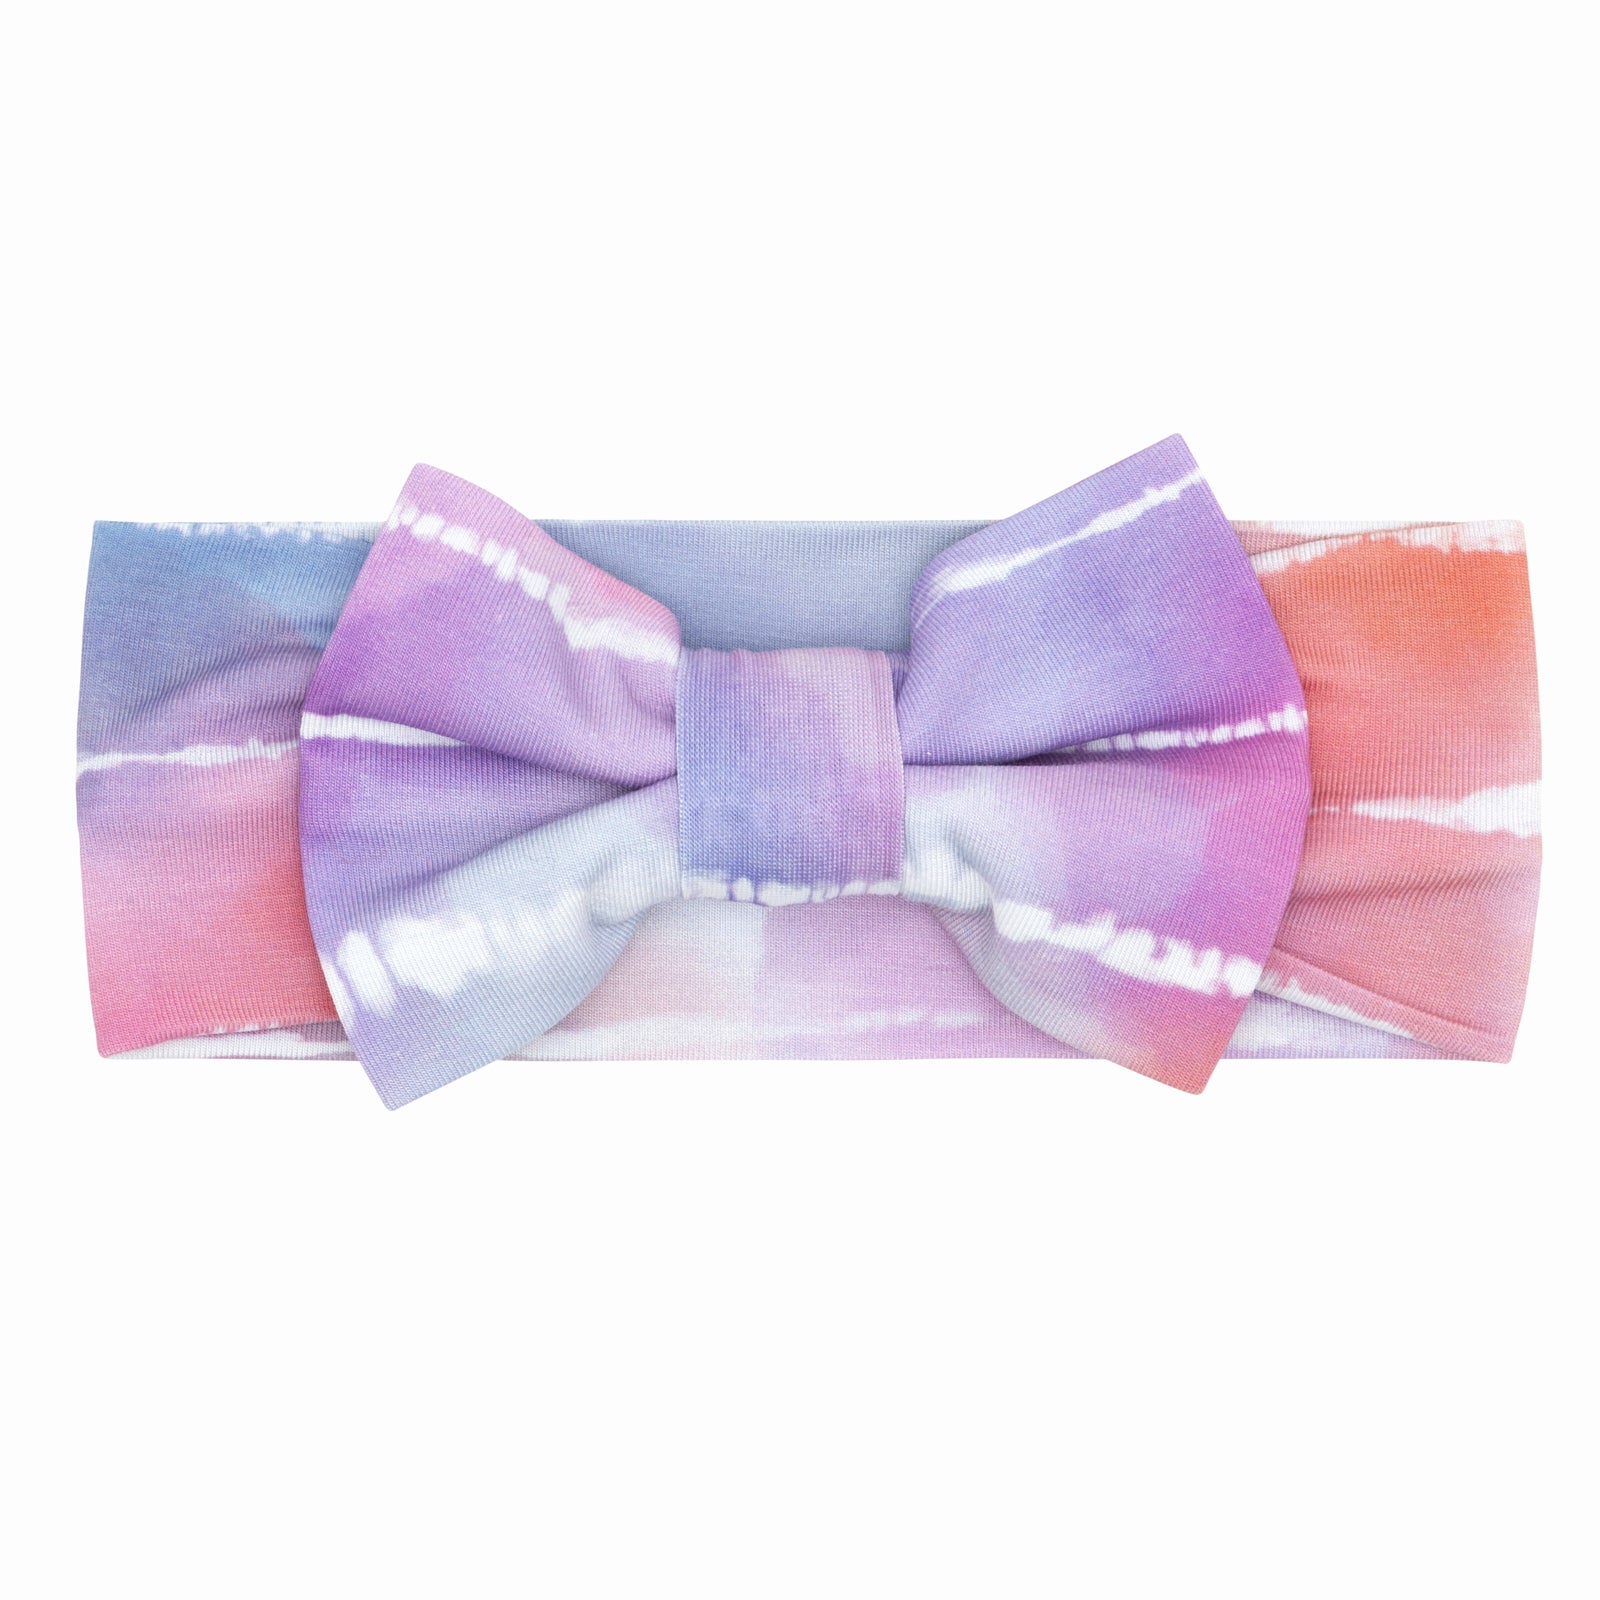 Flat lay image of a Pastel Tie Dye Dreams luxe bow headband